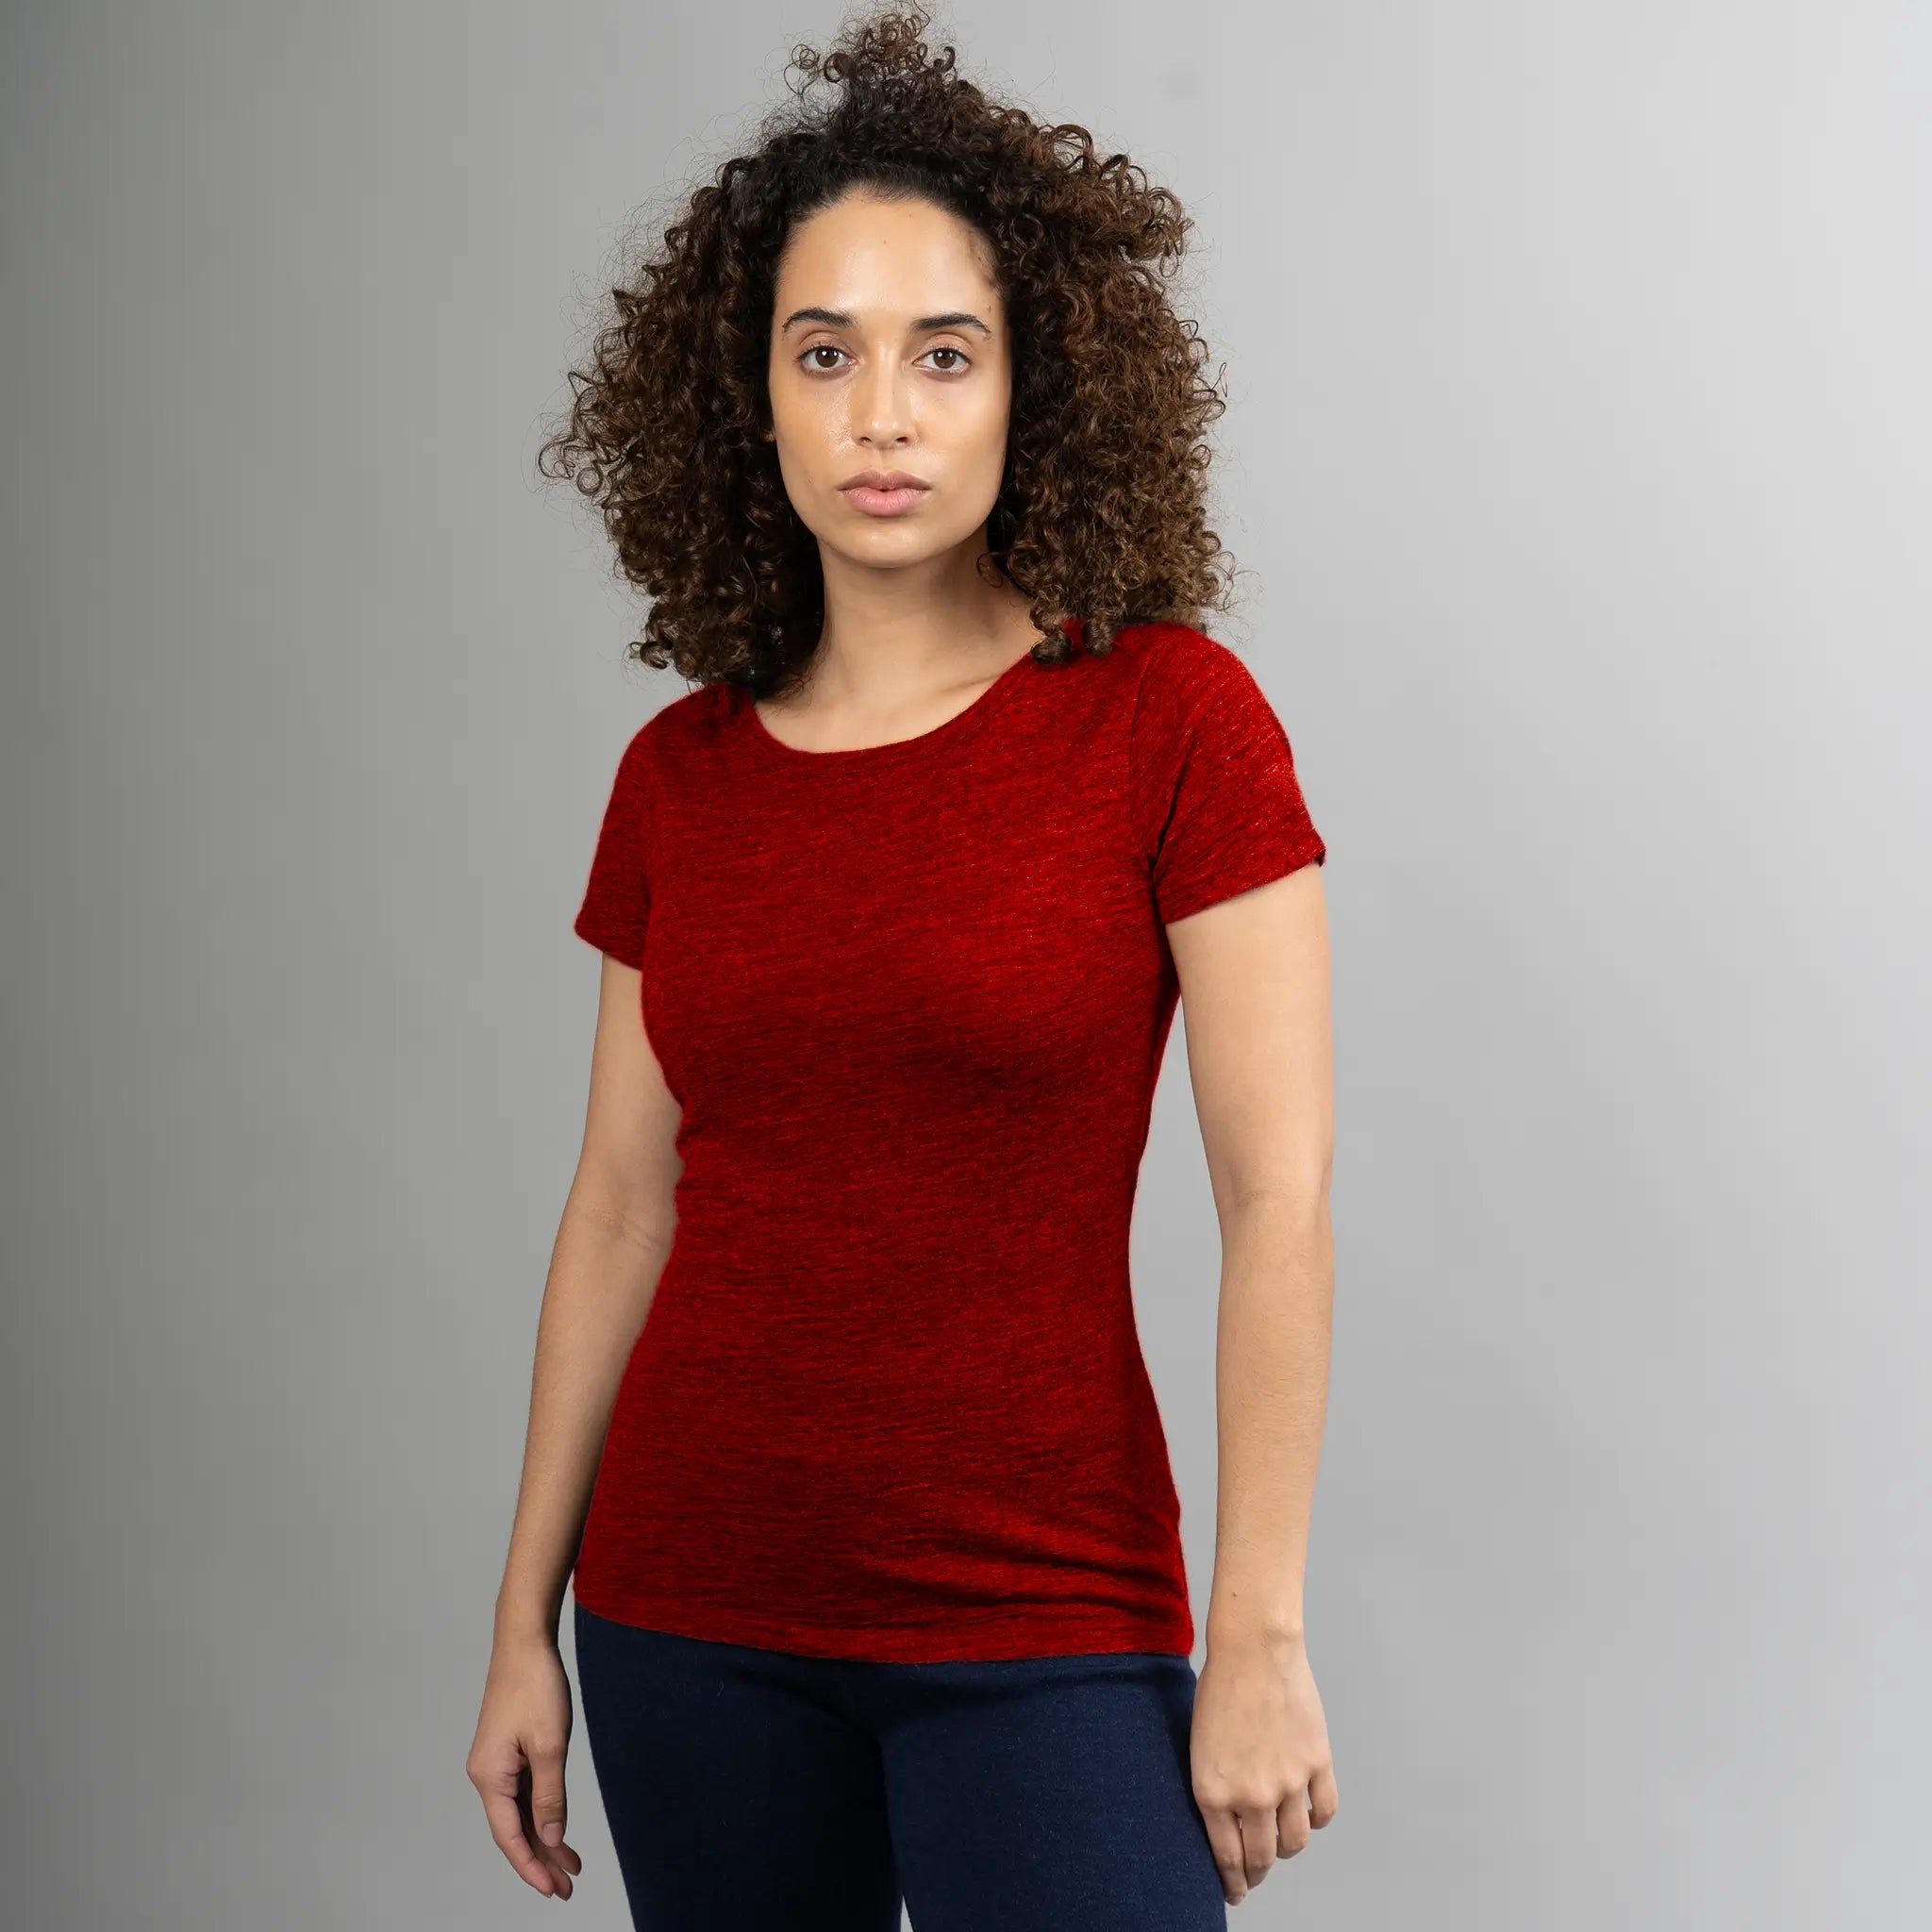 womens ecological crew neck tshirt color red